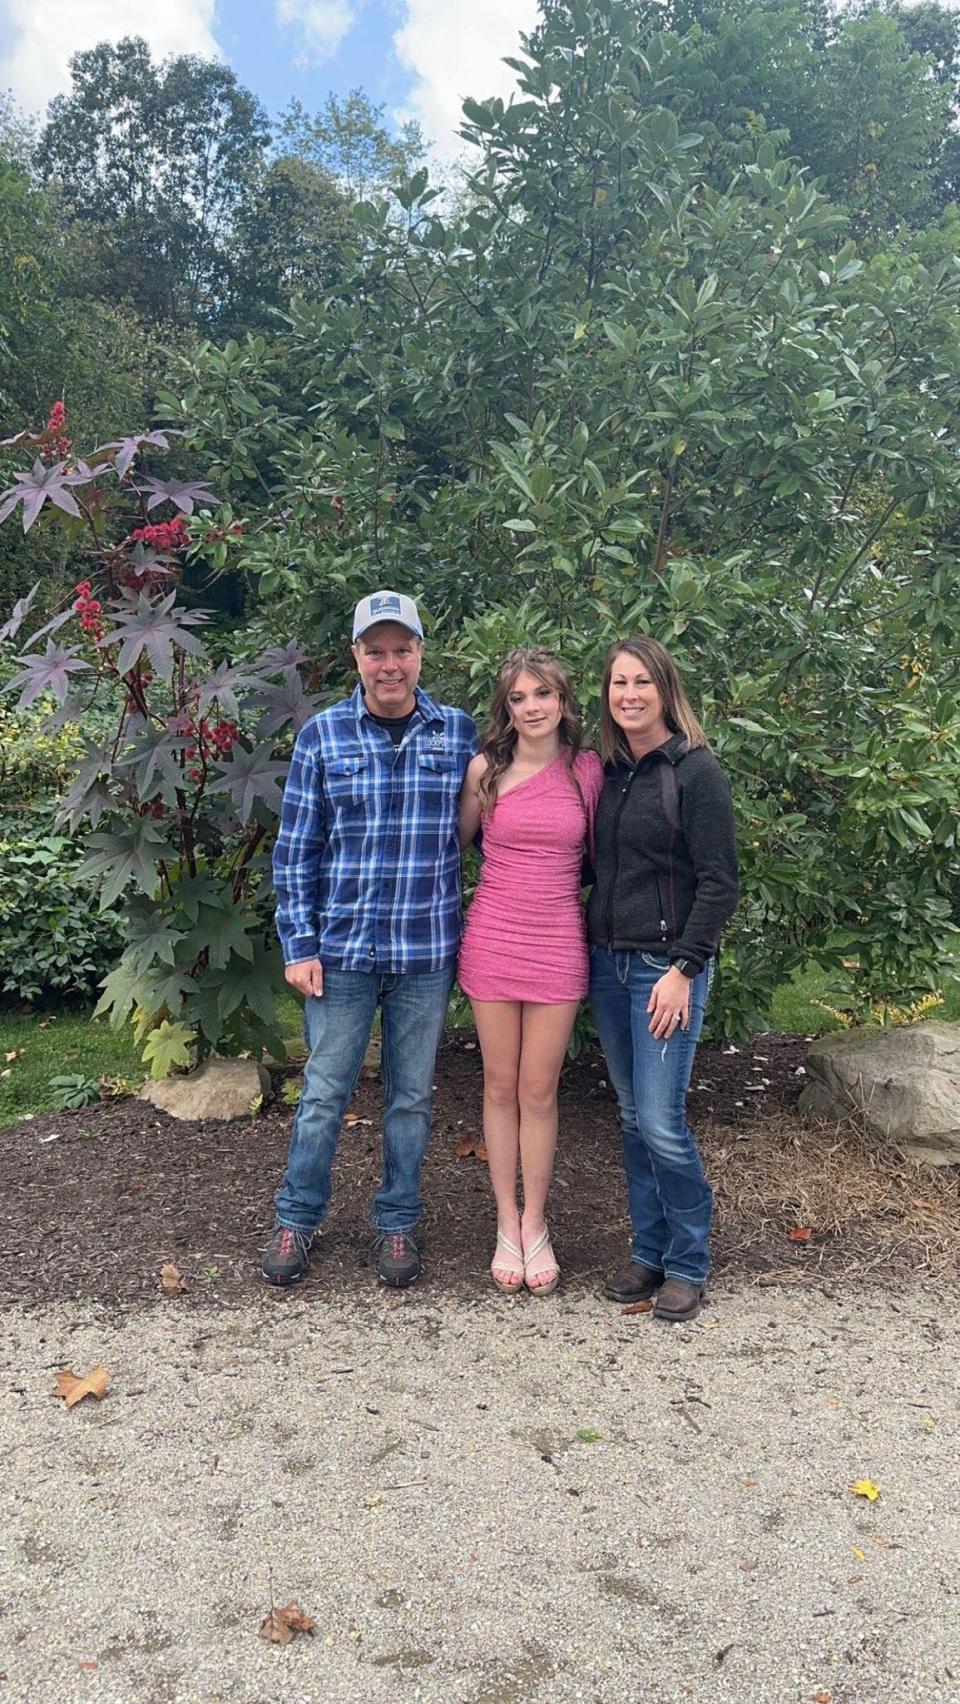 Katelyn N. Owens is shown with her parents Mike and Erika Owens. Katelyn, 15, died in Tuesday's fiery bus crash that claimed the lives of six people, including two other students from Tuscarawas Valley High School and three adults.